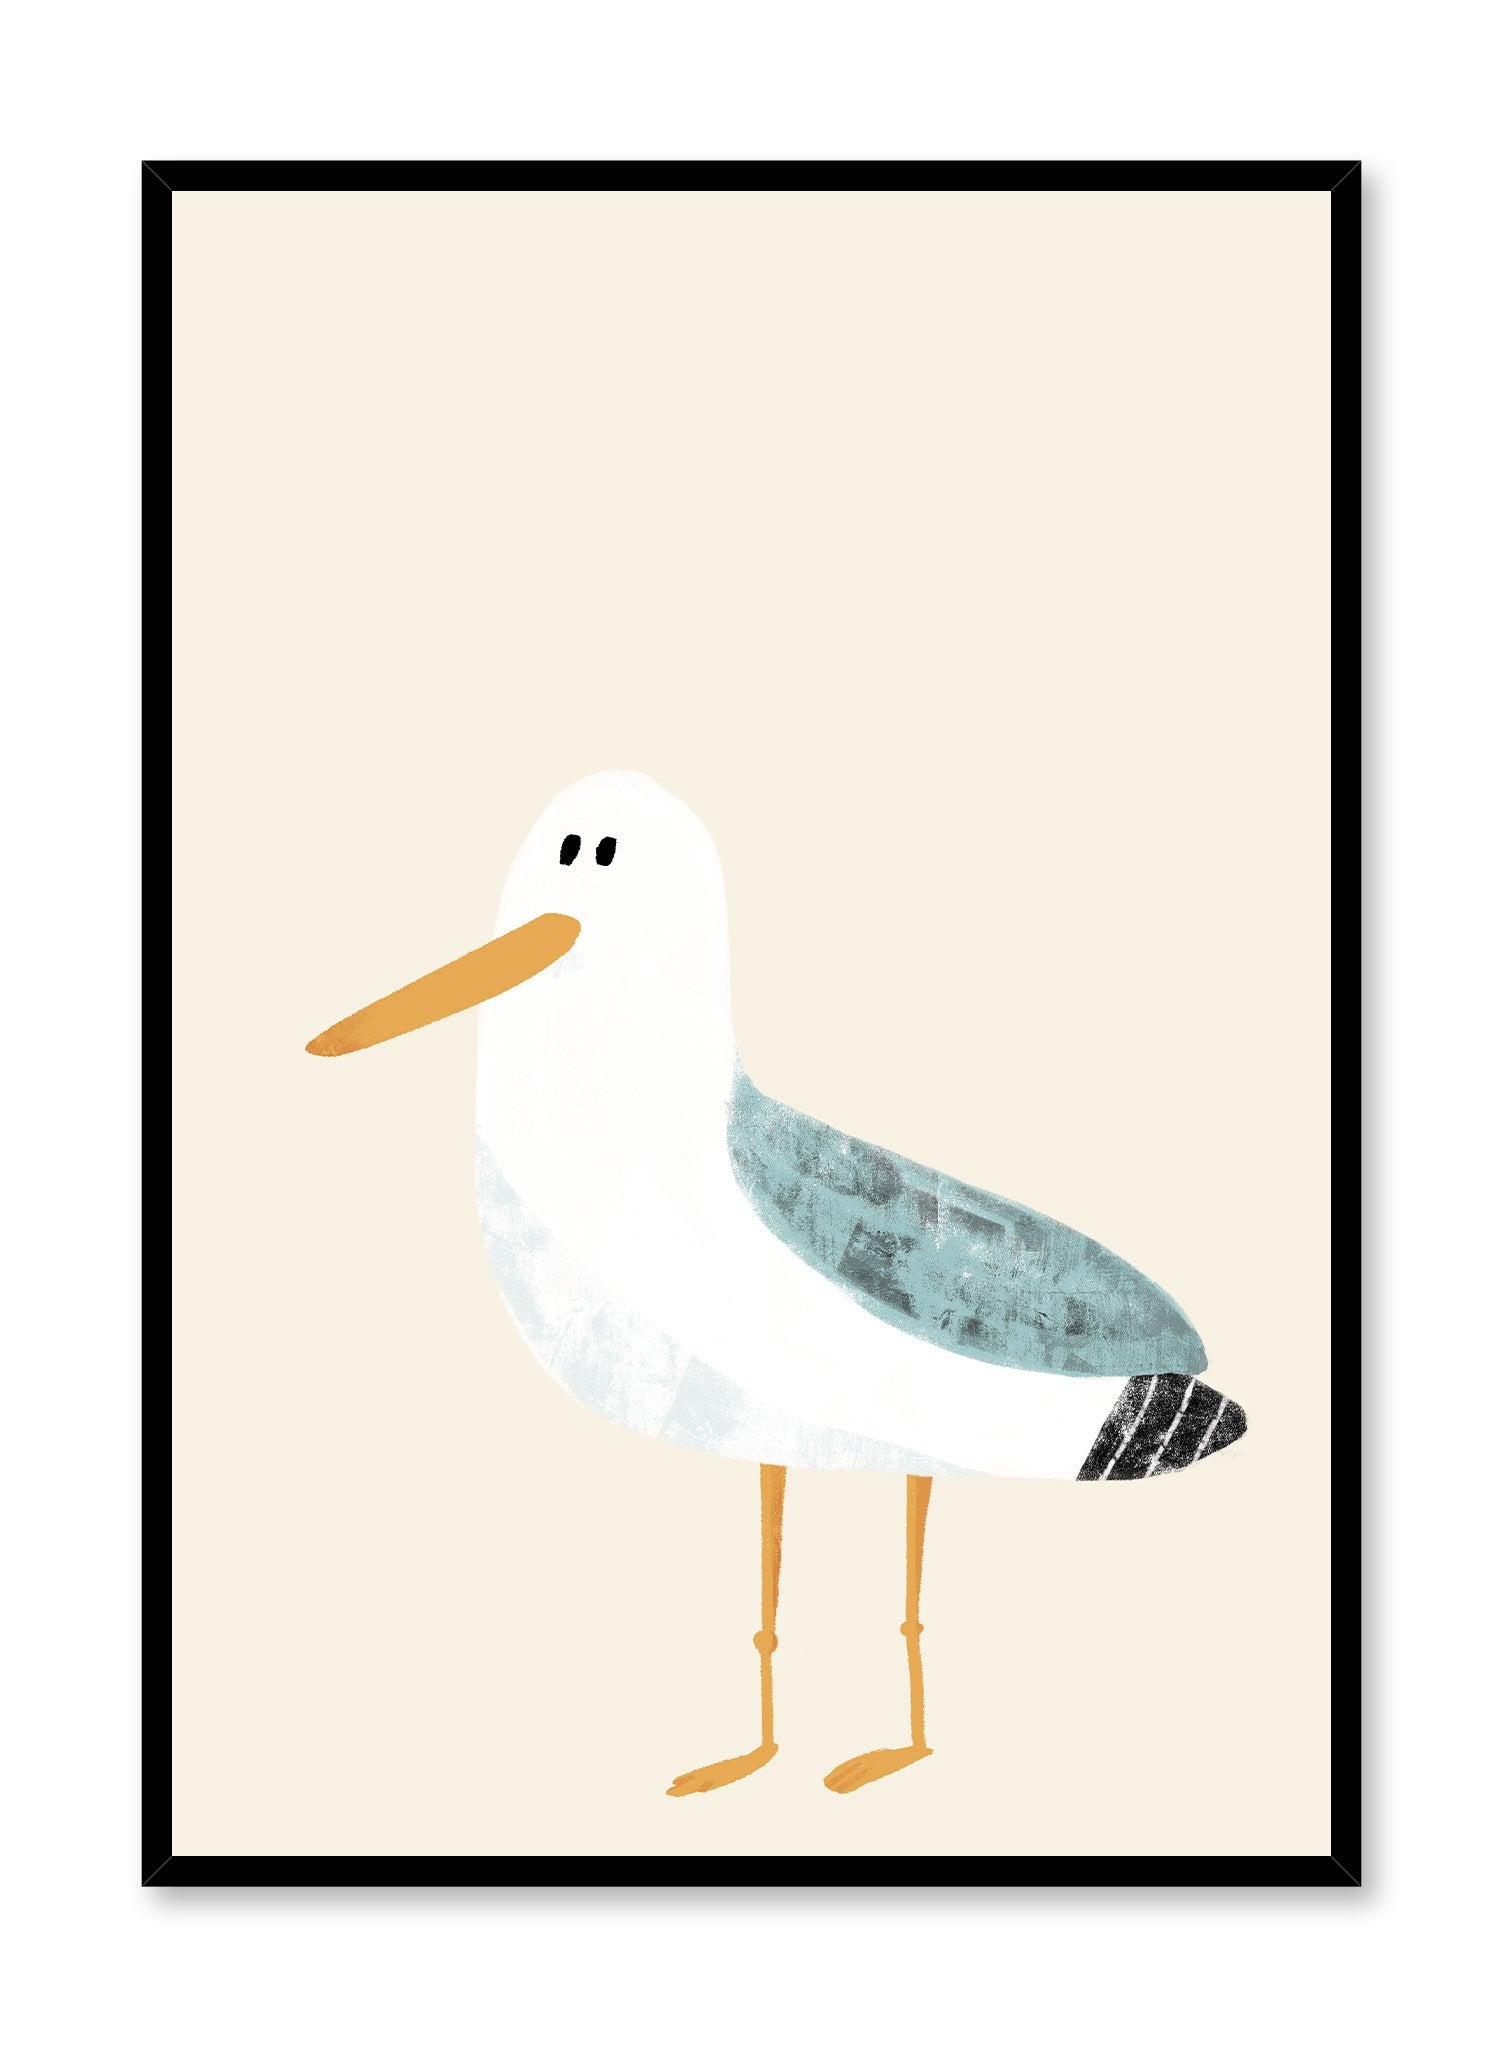 Sweet Seagull is a minimalist illustration of a white seagull with teal-coloured wings starring at the observer by Opposite Wall.